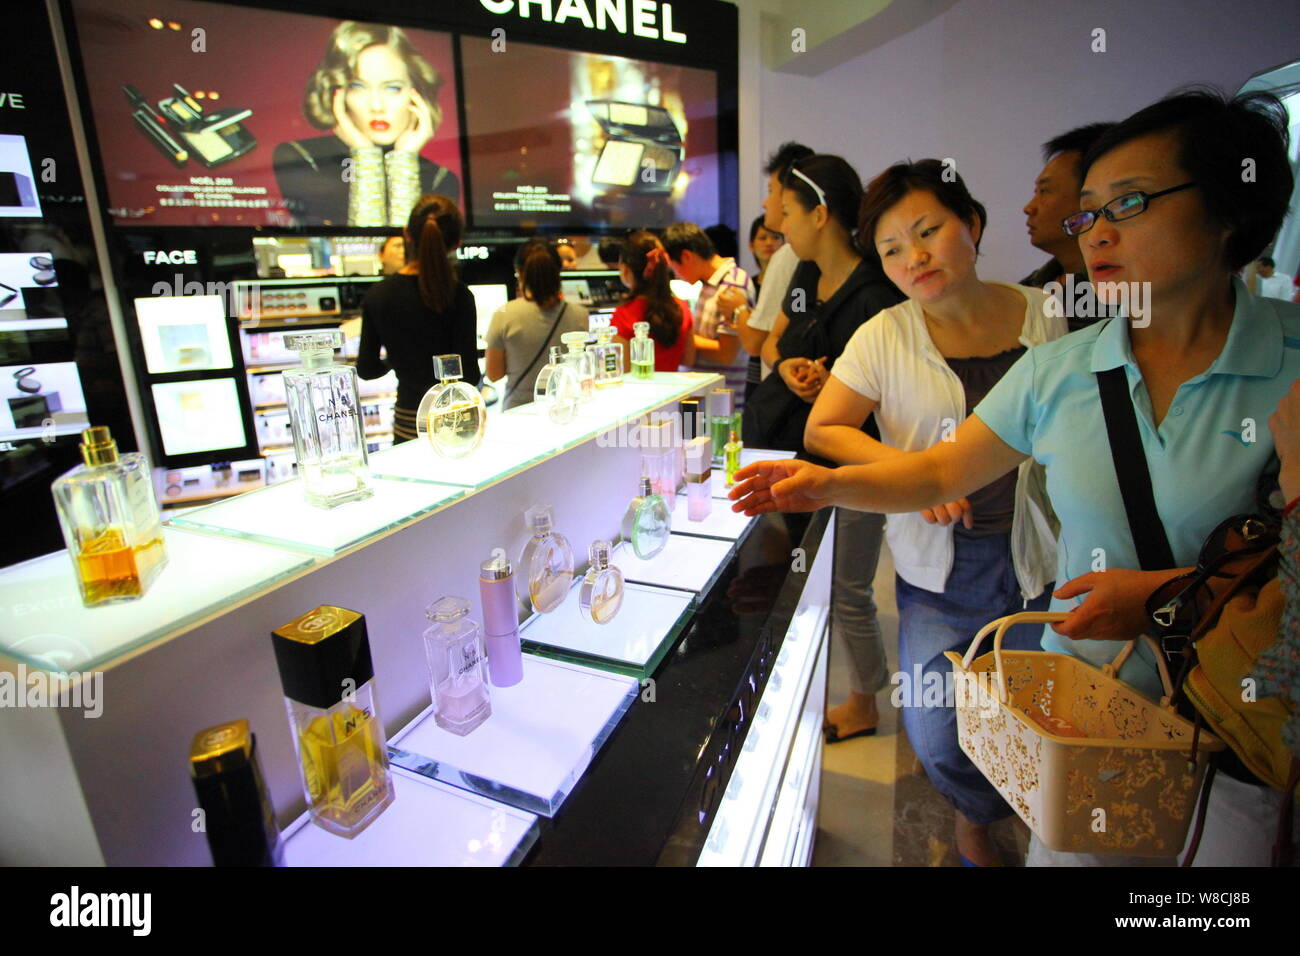 FILE--Customers shop for perfume at a cosmetics store of Chanel in